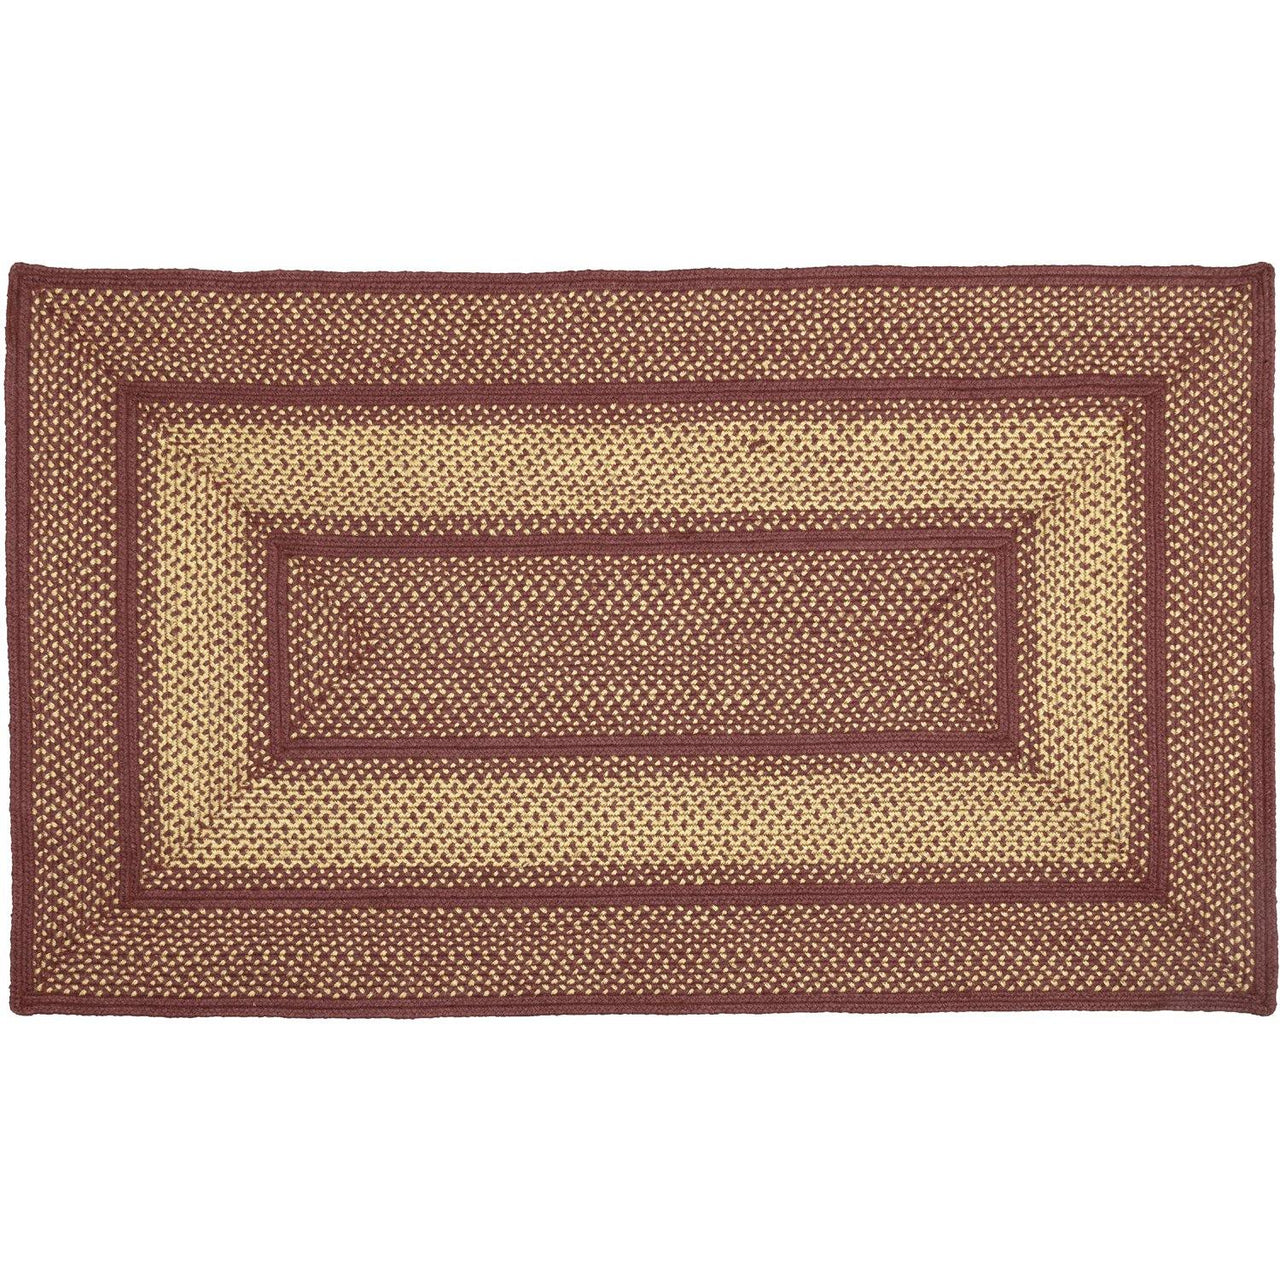 Burgundy Red Primitive Jute Braided Rug Rect 3'x5' with Rug Pad VHC Brands - The Fox Decor